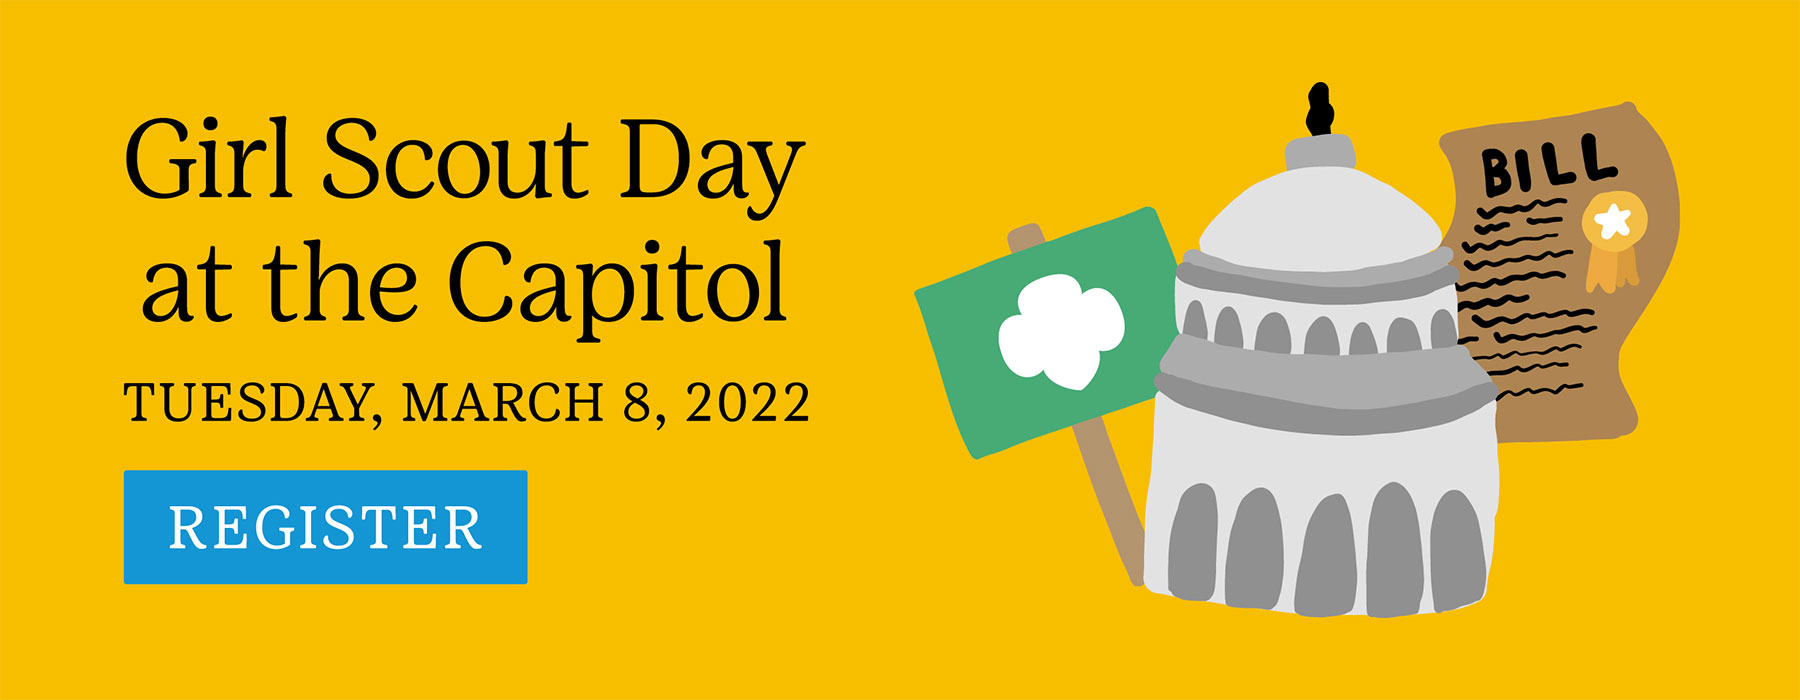 Register for Girl Scout Day at the Capitol